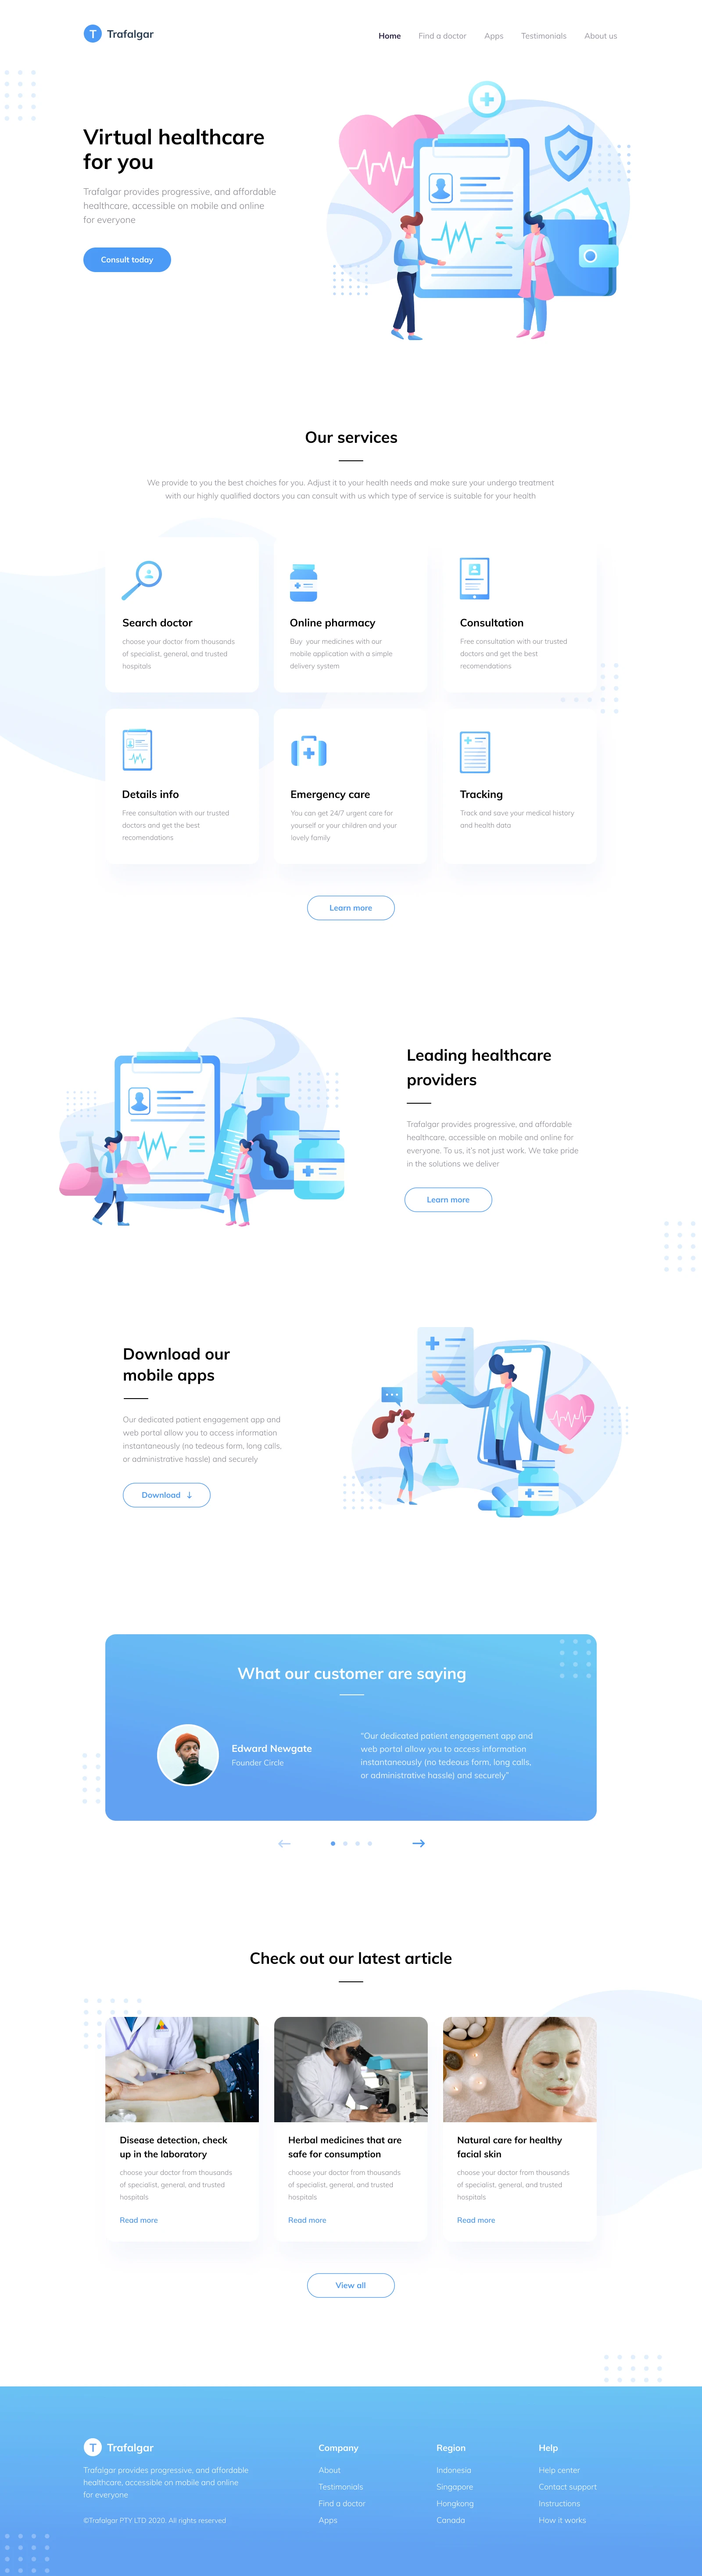 Trafalgar Landing Page for Figma - Trafalgar is a landing page for a one-stop healthcare solution. Elegant and clean landing page design for Figma.